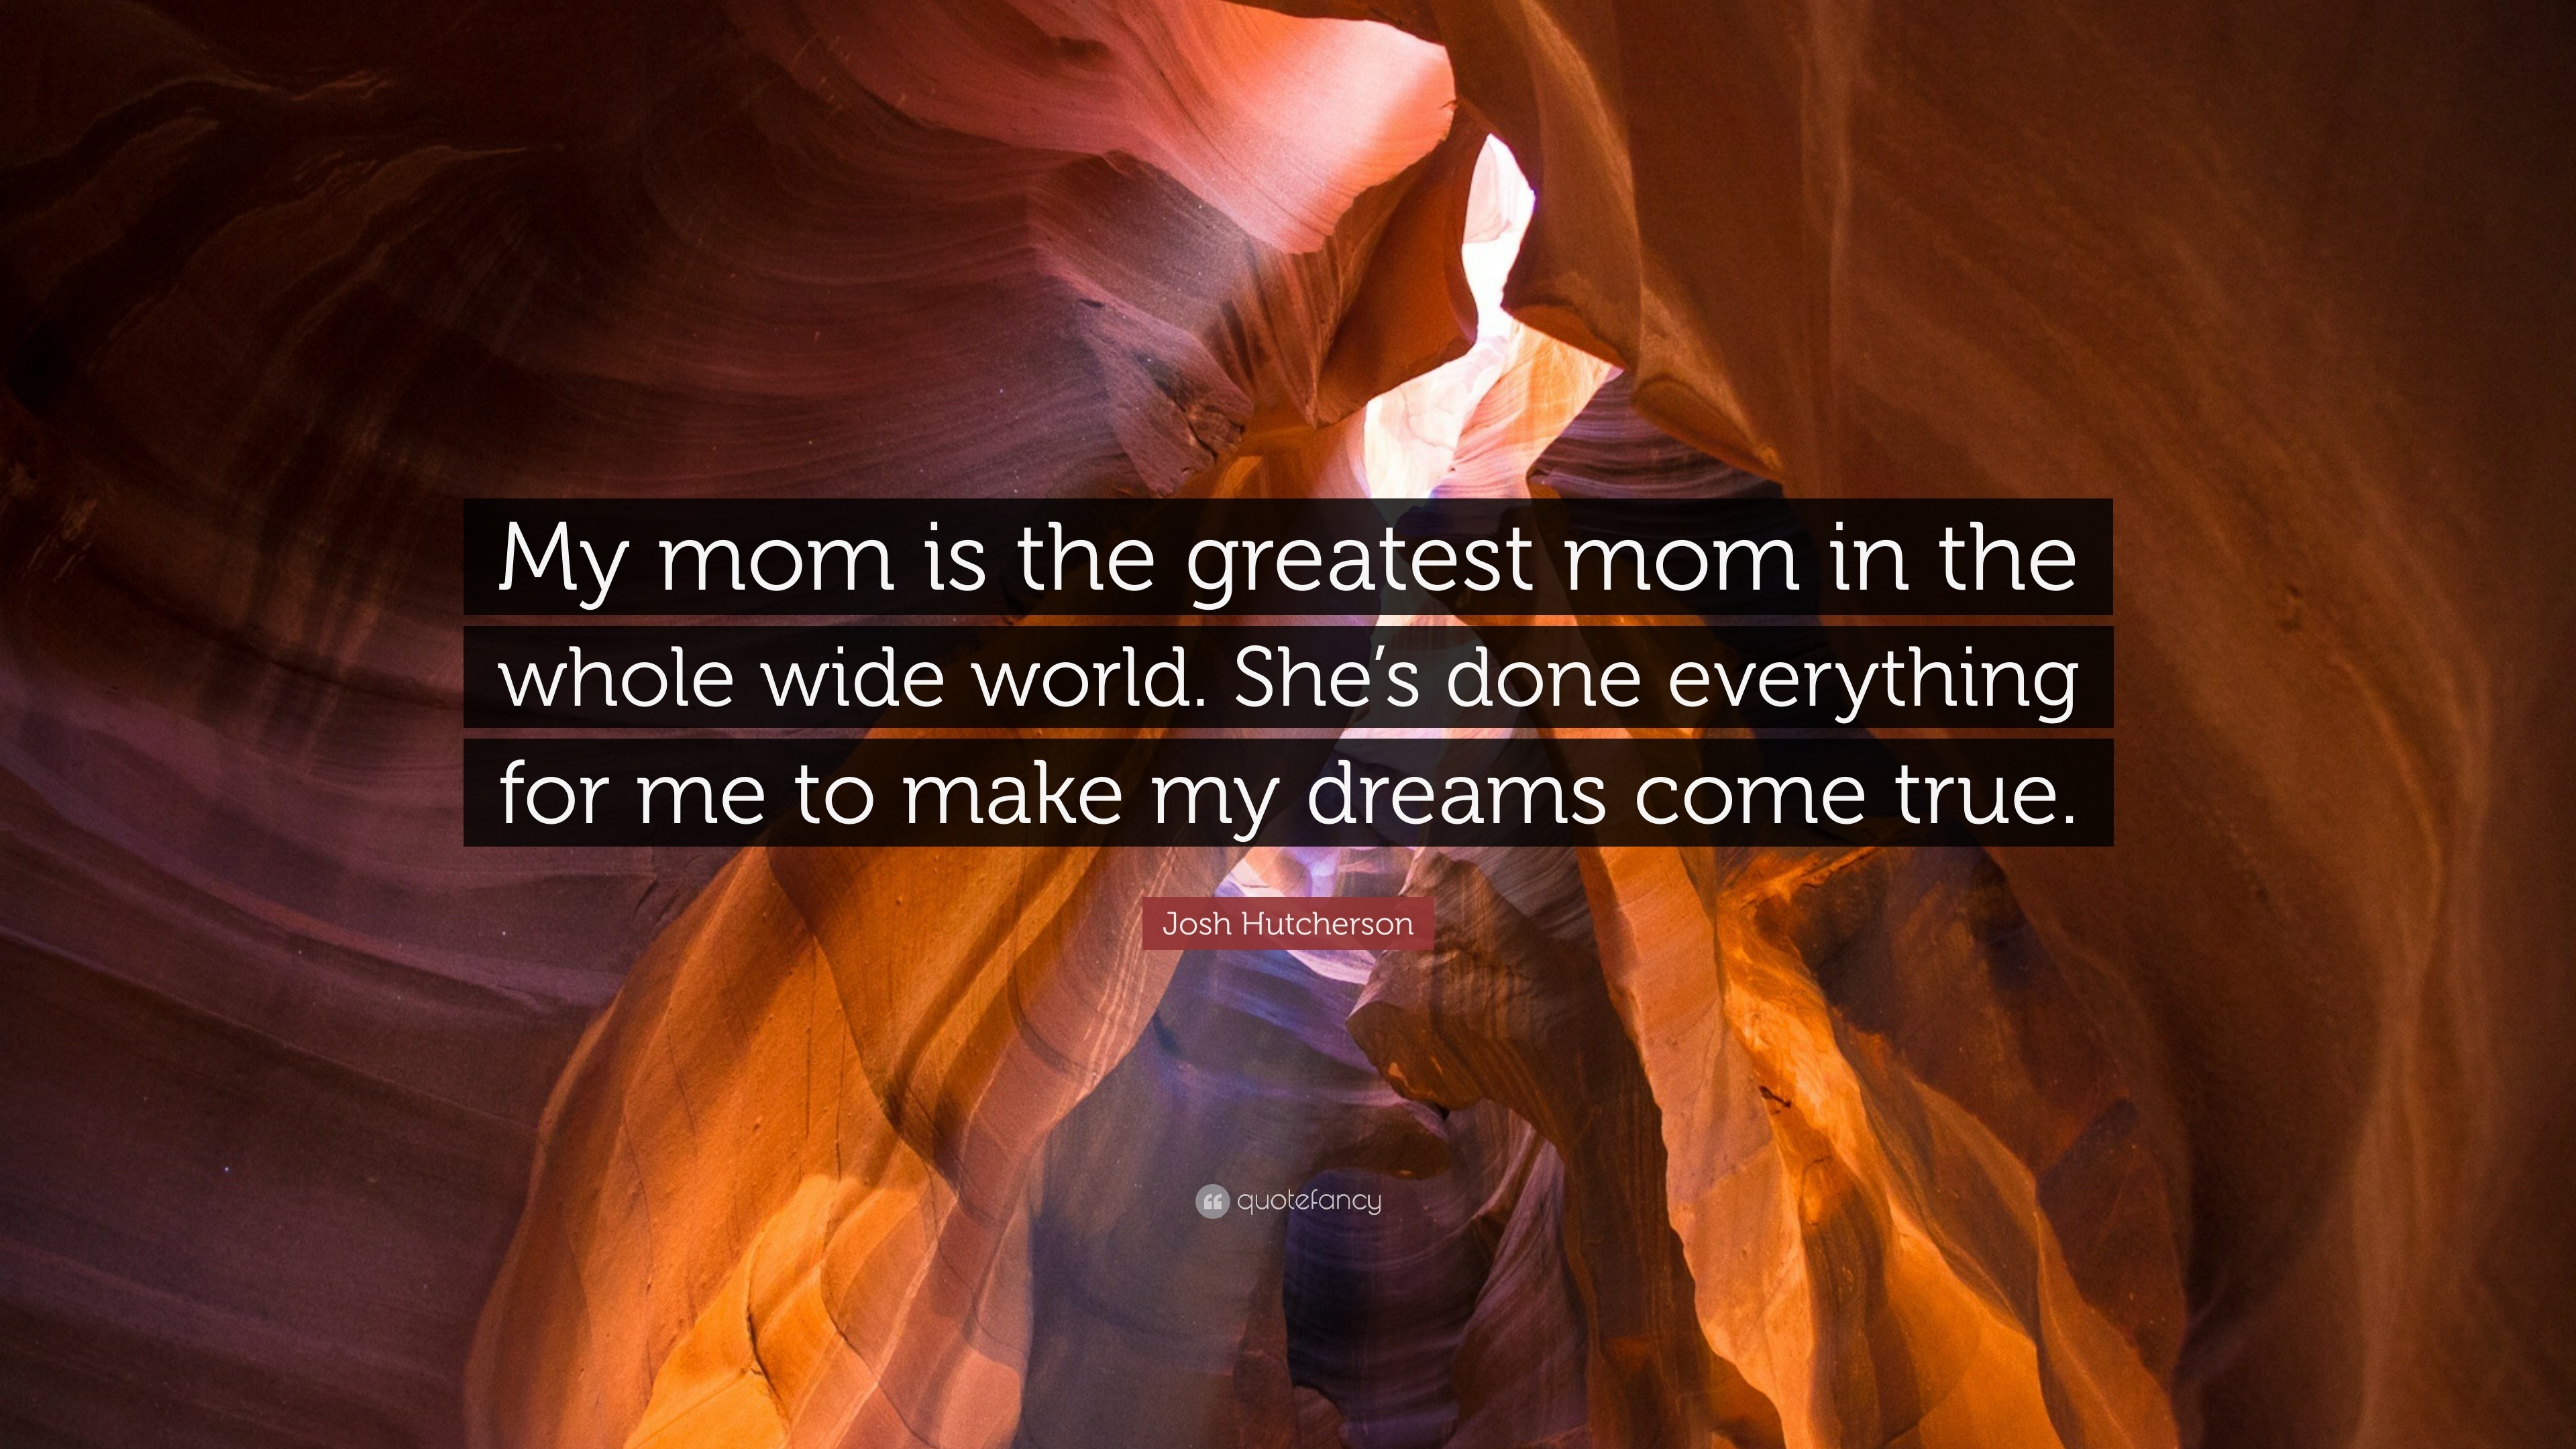 https://quotefancy.com/media/wallpaper/3840x2160/962080-Josh-Hutcherson-Quote-My-mom-is-the-greatest-mom-in-the-whole-wide.jpg